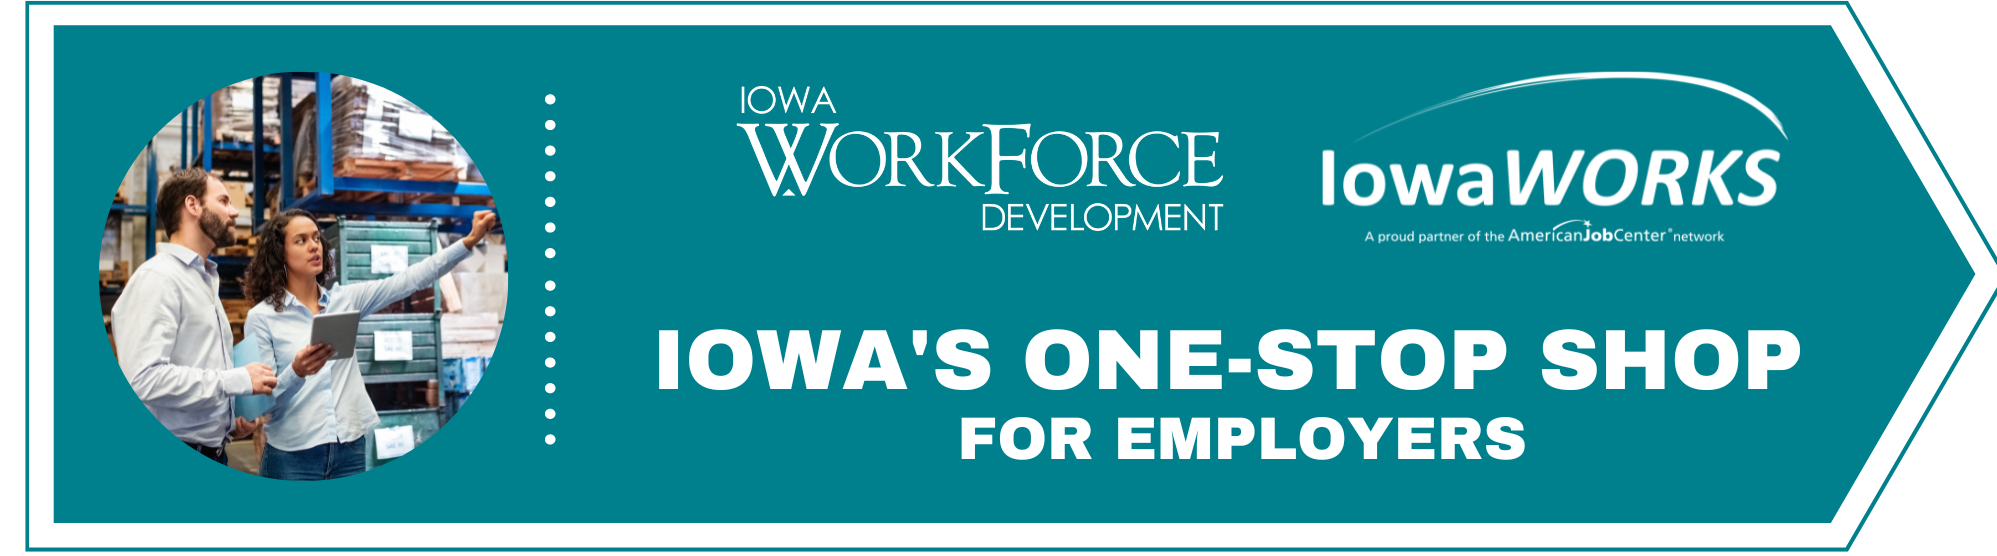 man and woman working in a warehouse with iowa workforce development and IowaWorks logos